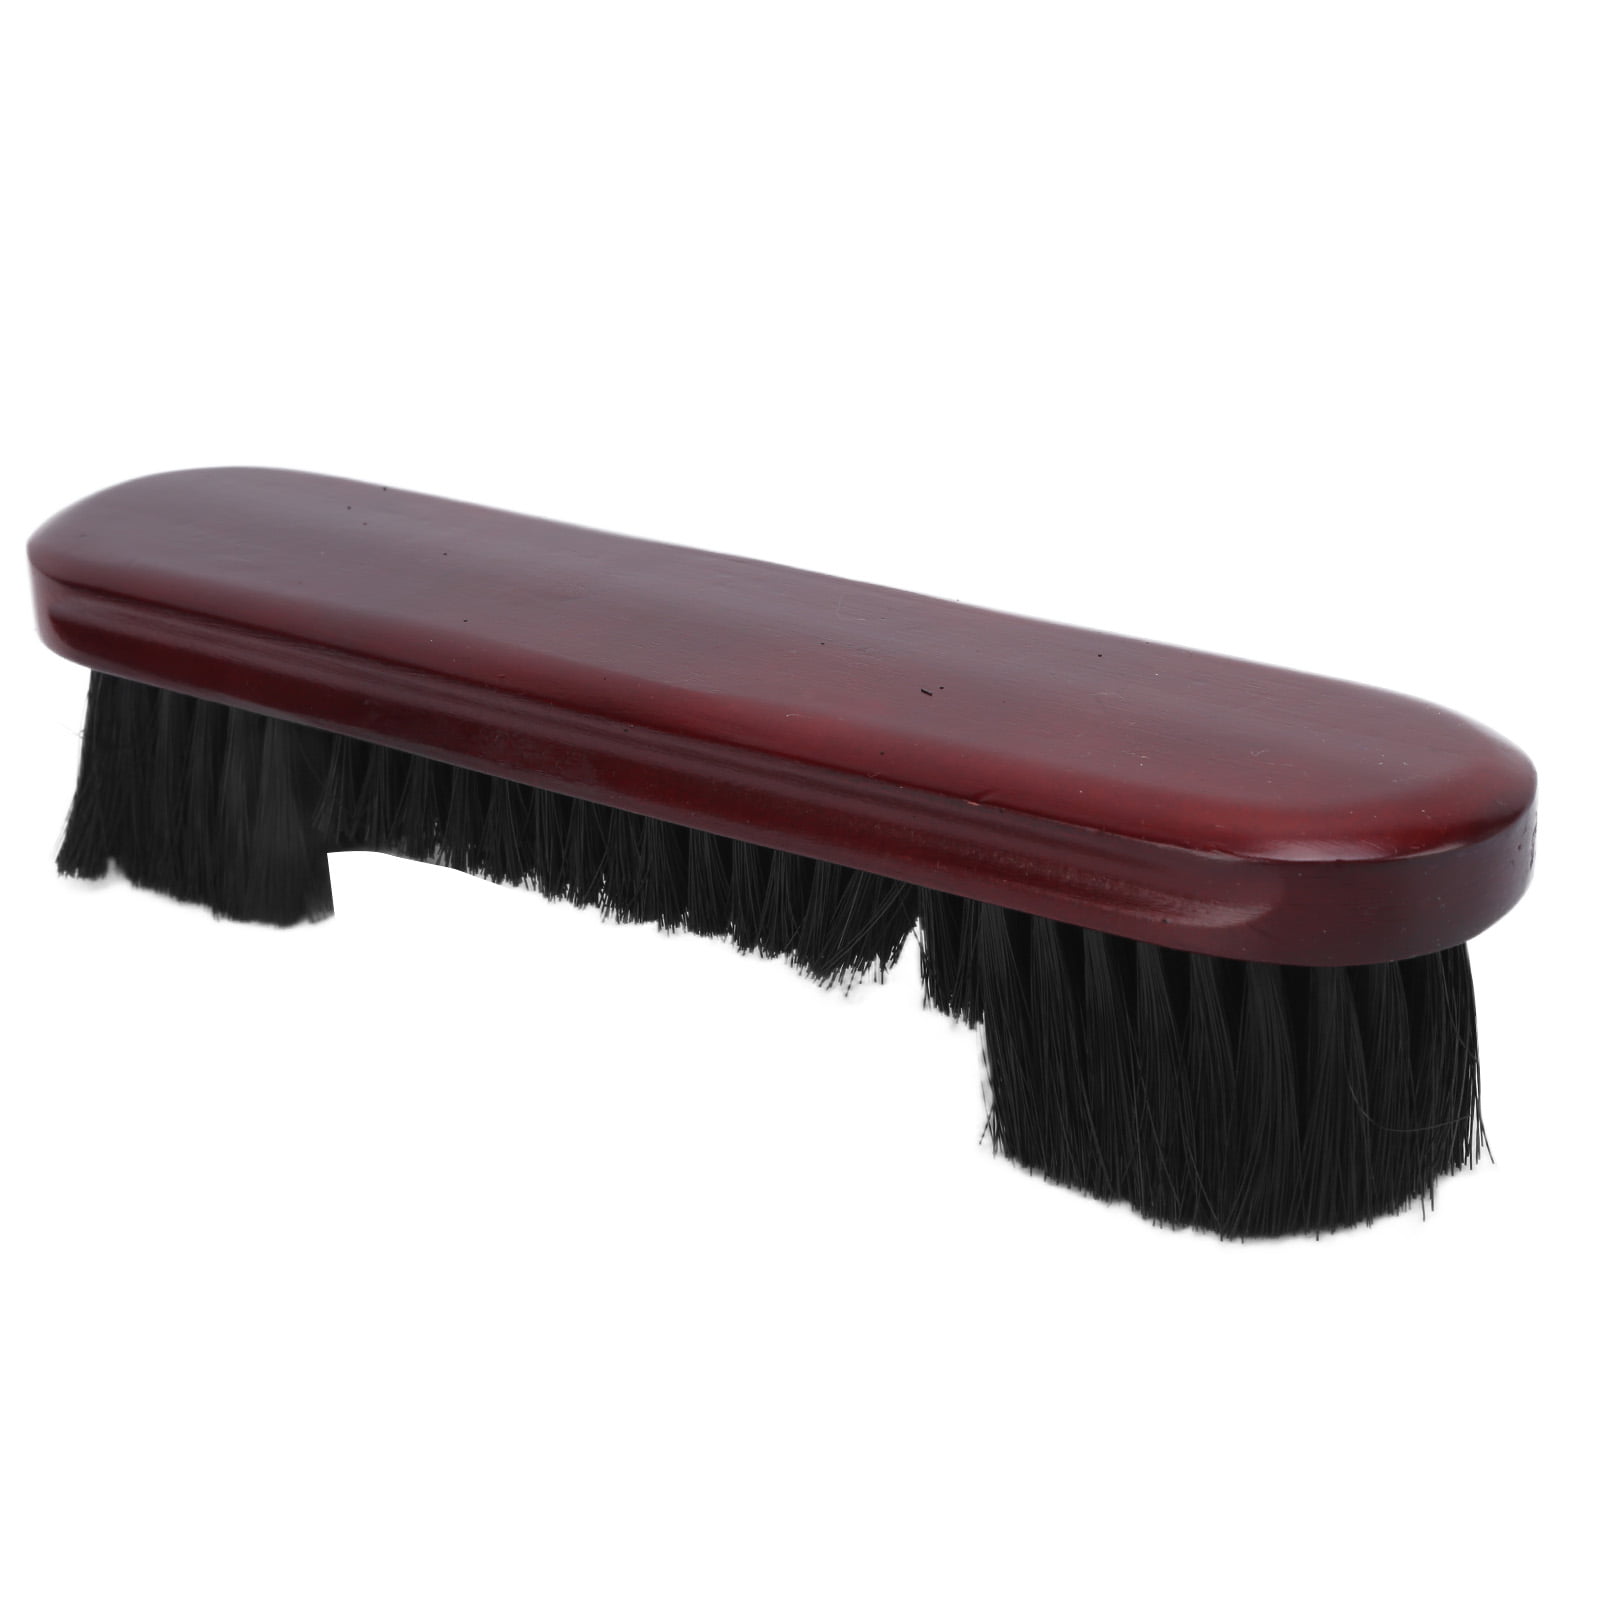 Pool Table Brush Wooden Pool Table Corner Cleaning Accessories 9.1 Inch Blliard Table Straight Brush 